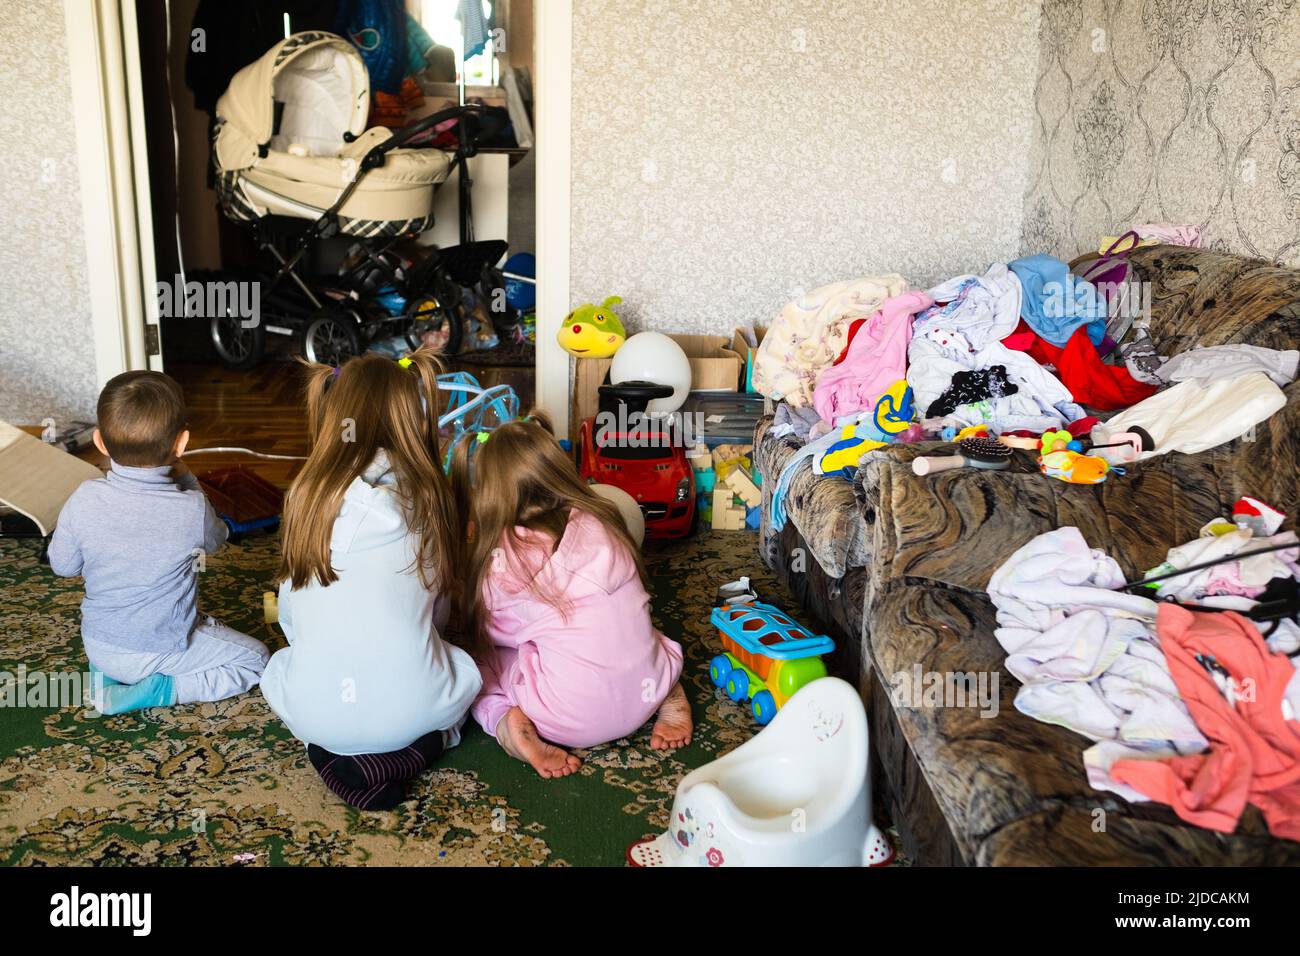 Three unrecognizable children are playing in a dirty cluttered room. Stock Photo